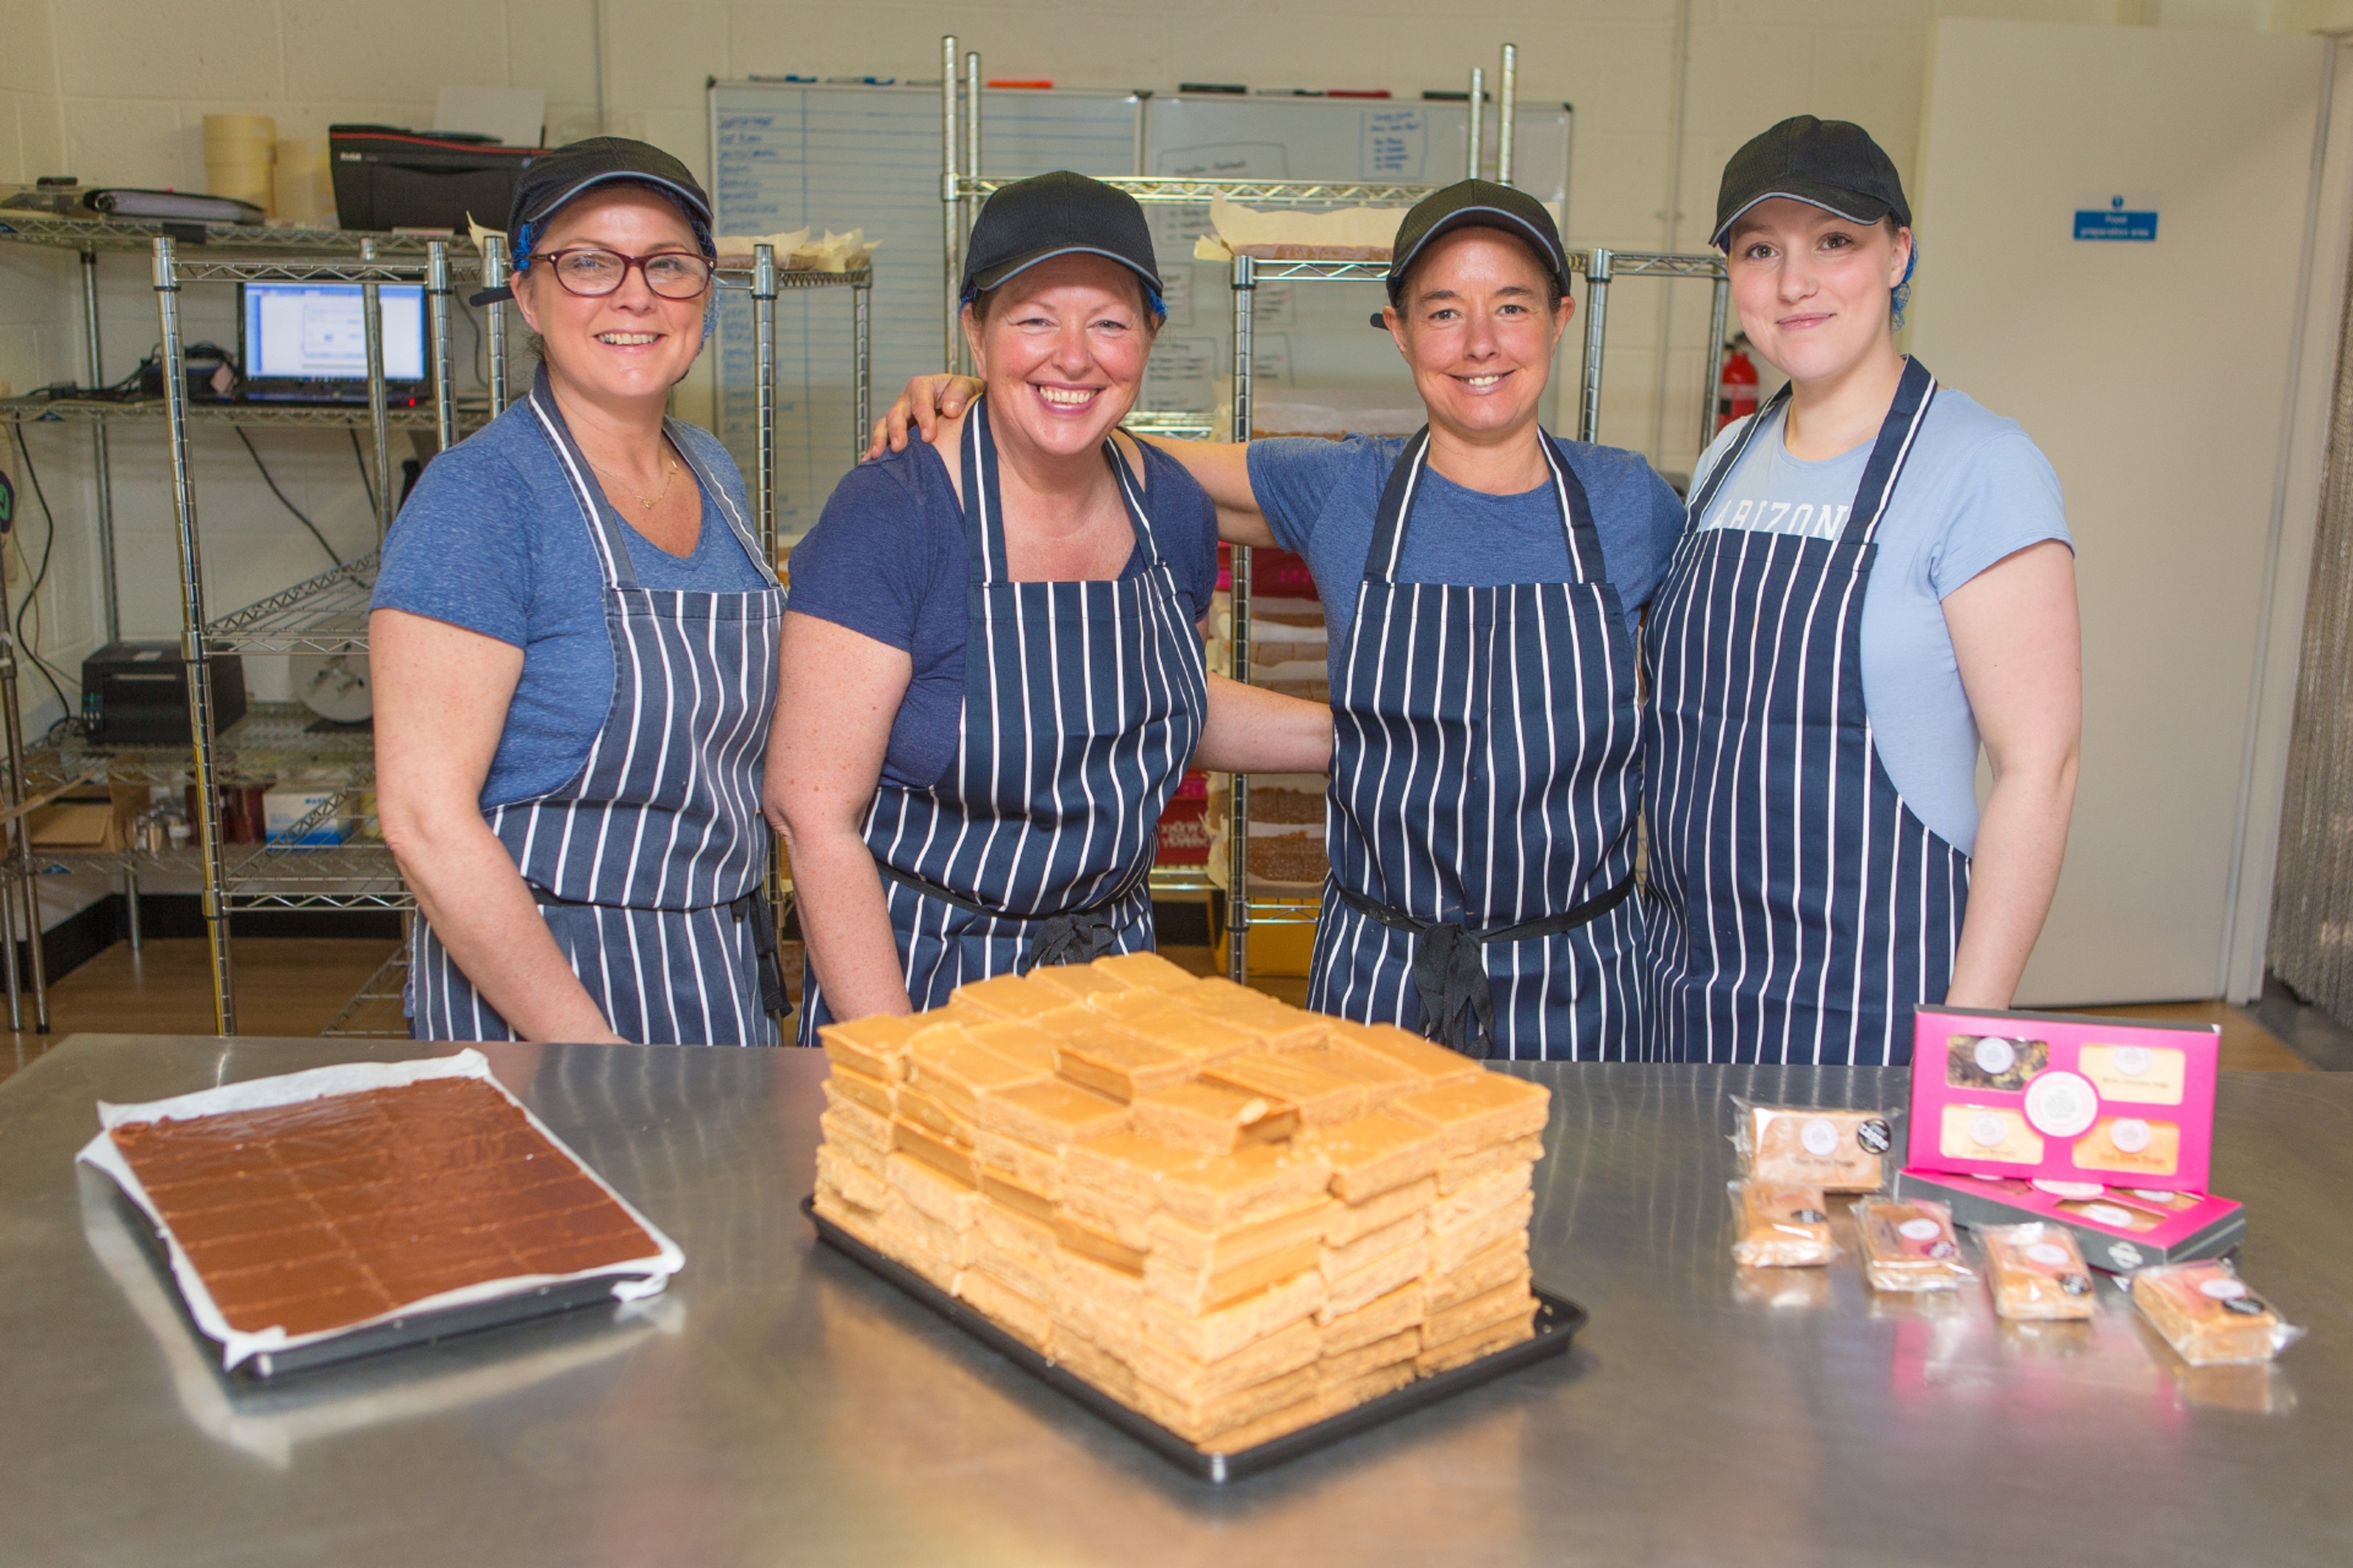 Ochil Fudge Pantry staff member Eileen Dall, owner Susan Fleming, owner Angie Craven and staff member Amy Craw.